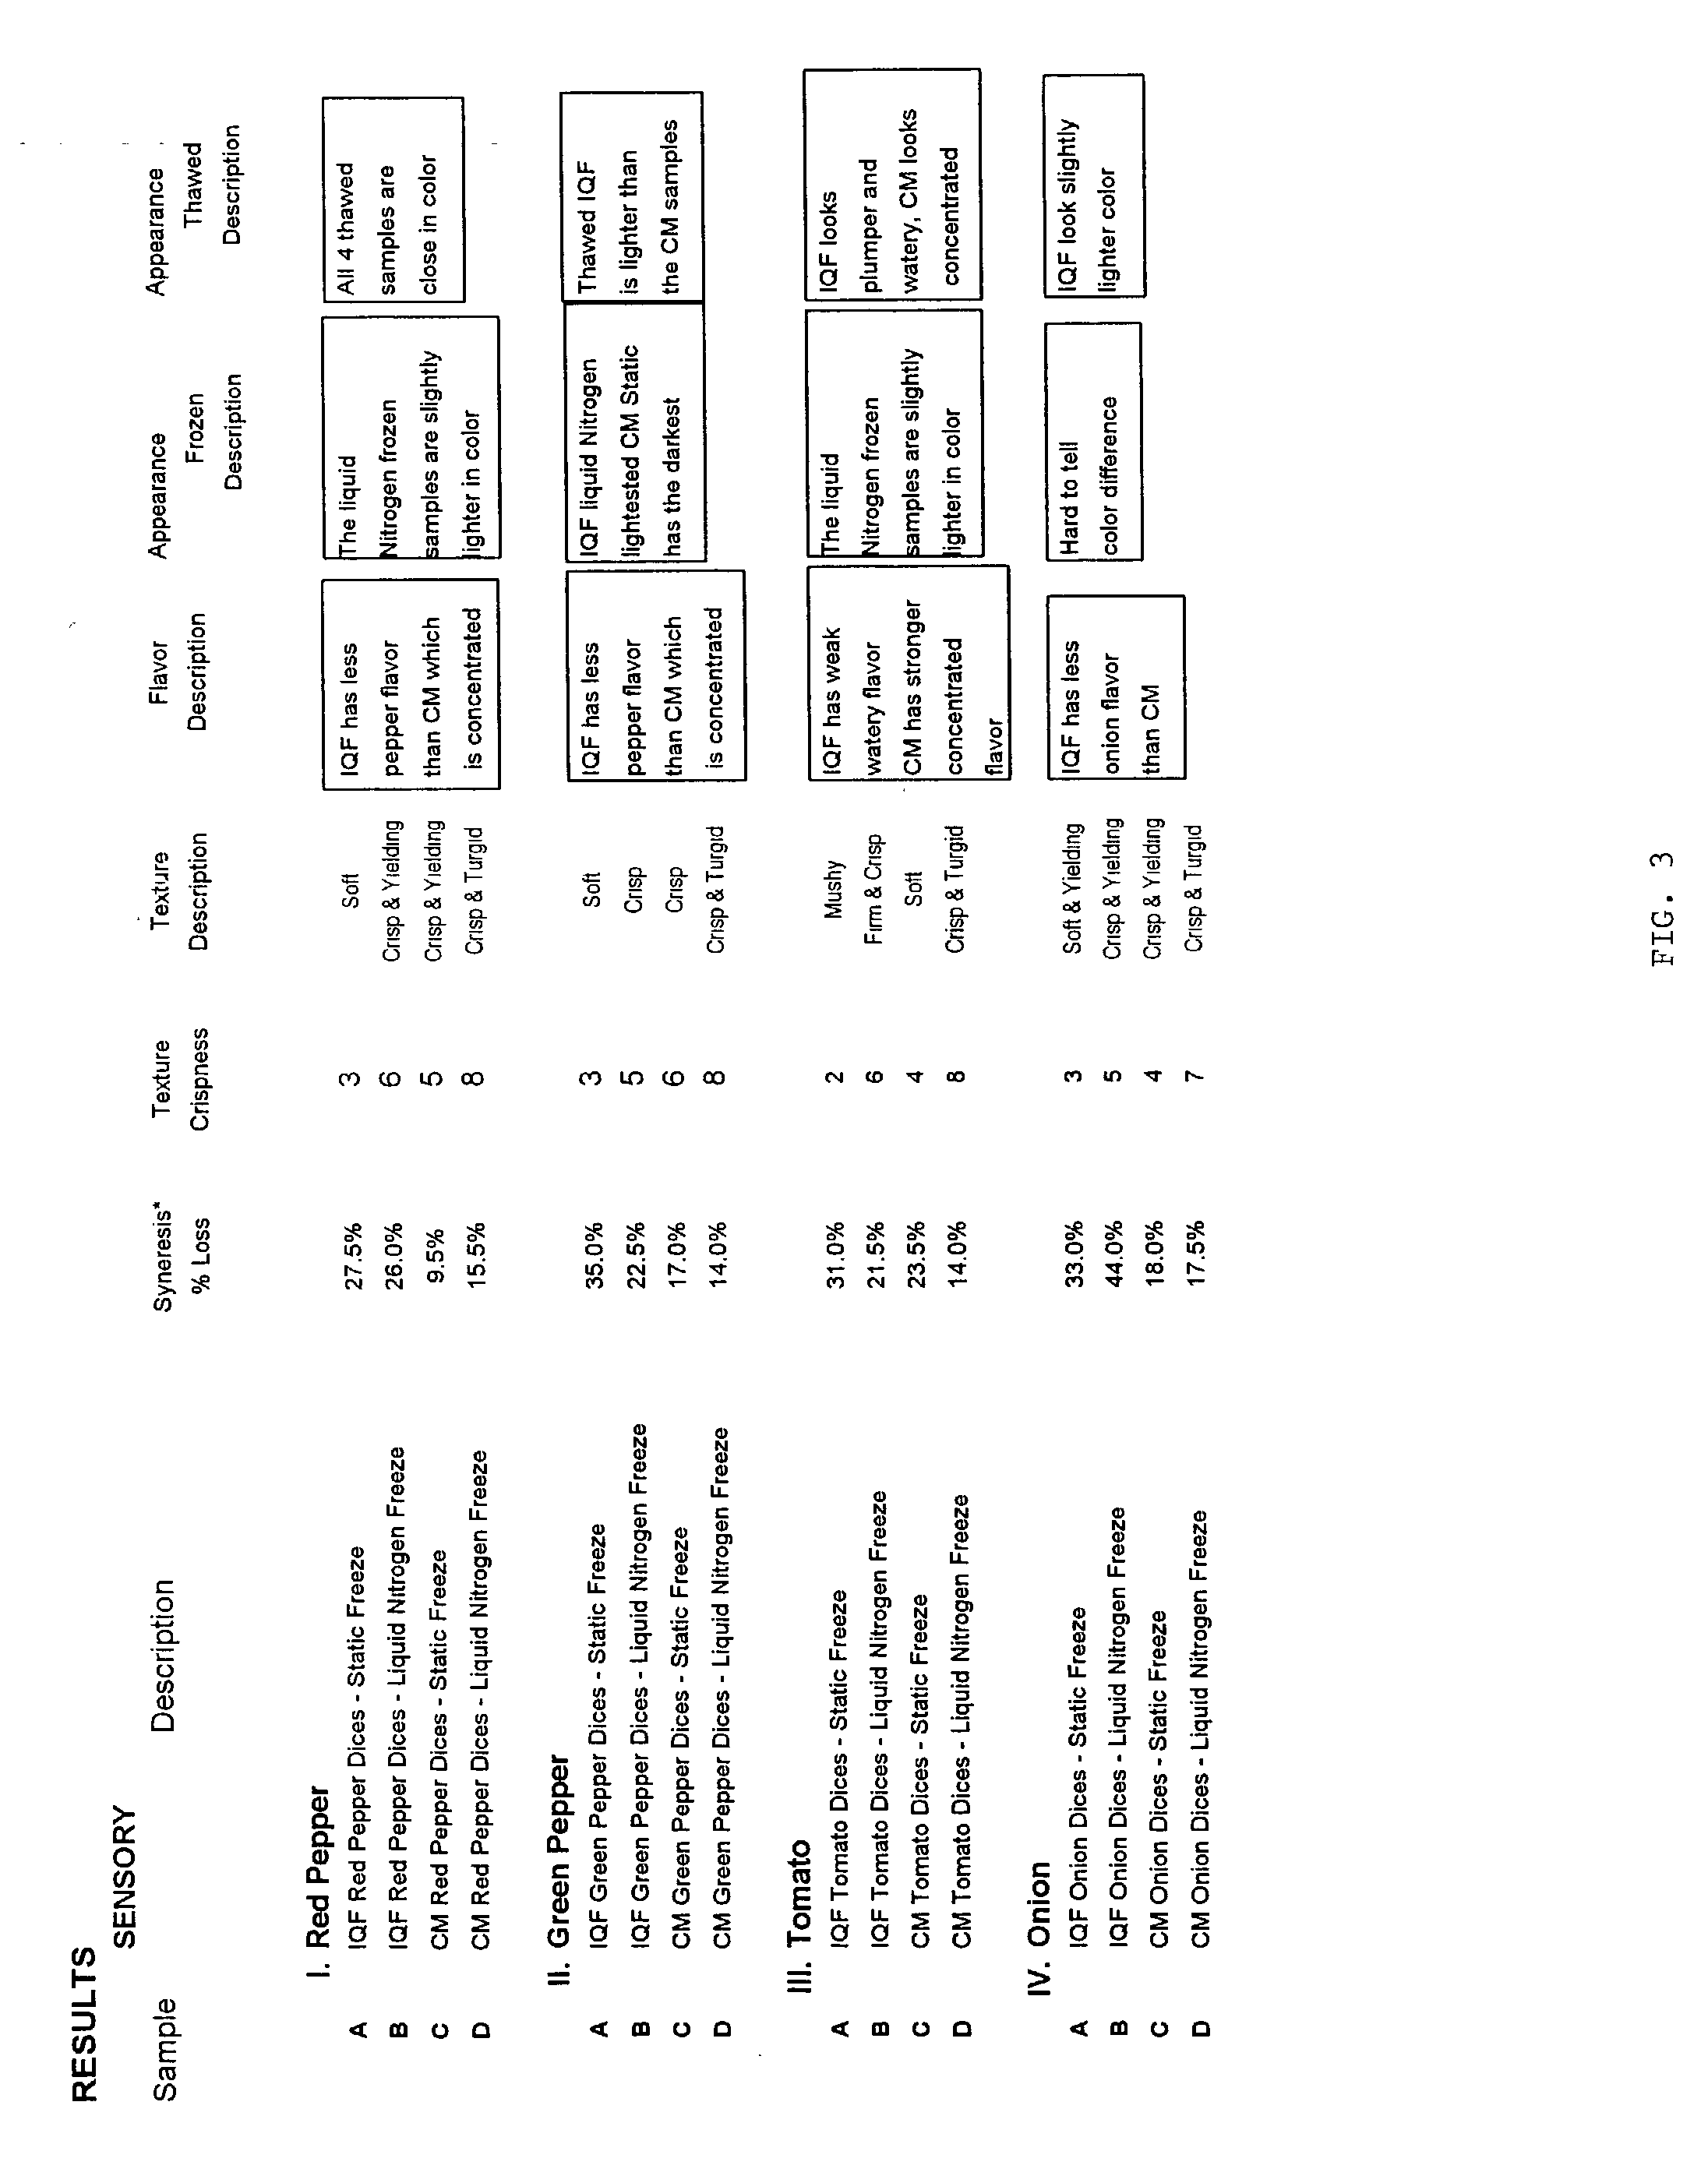 Method for production of frozen vegetables or fruits